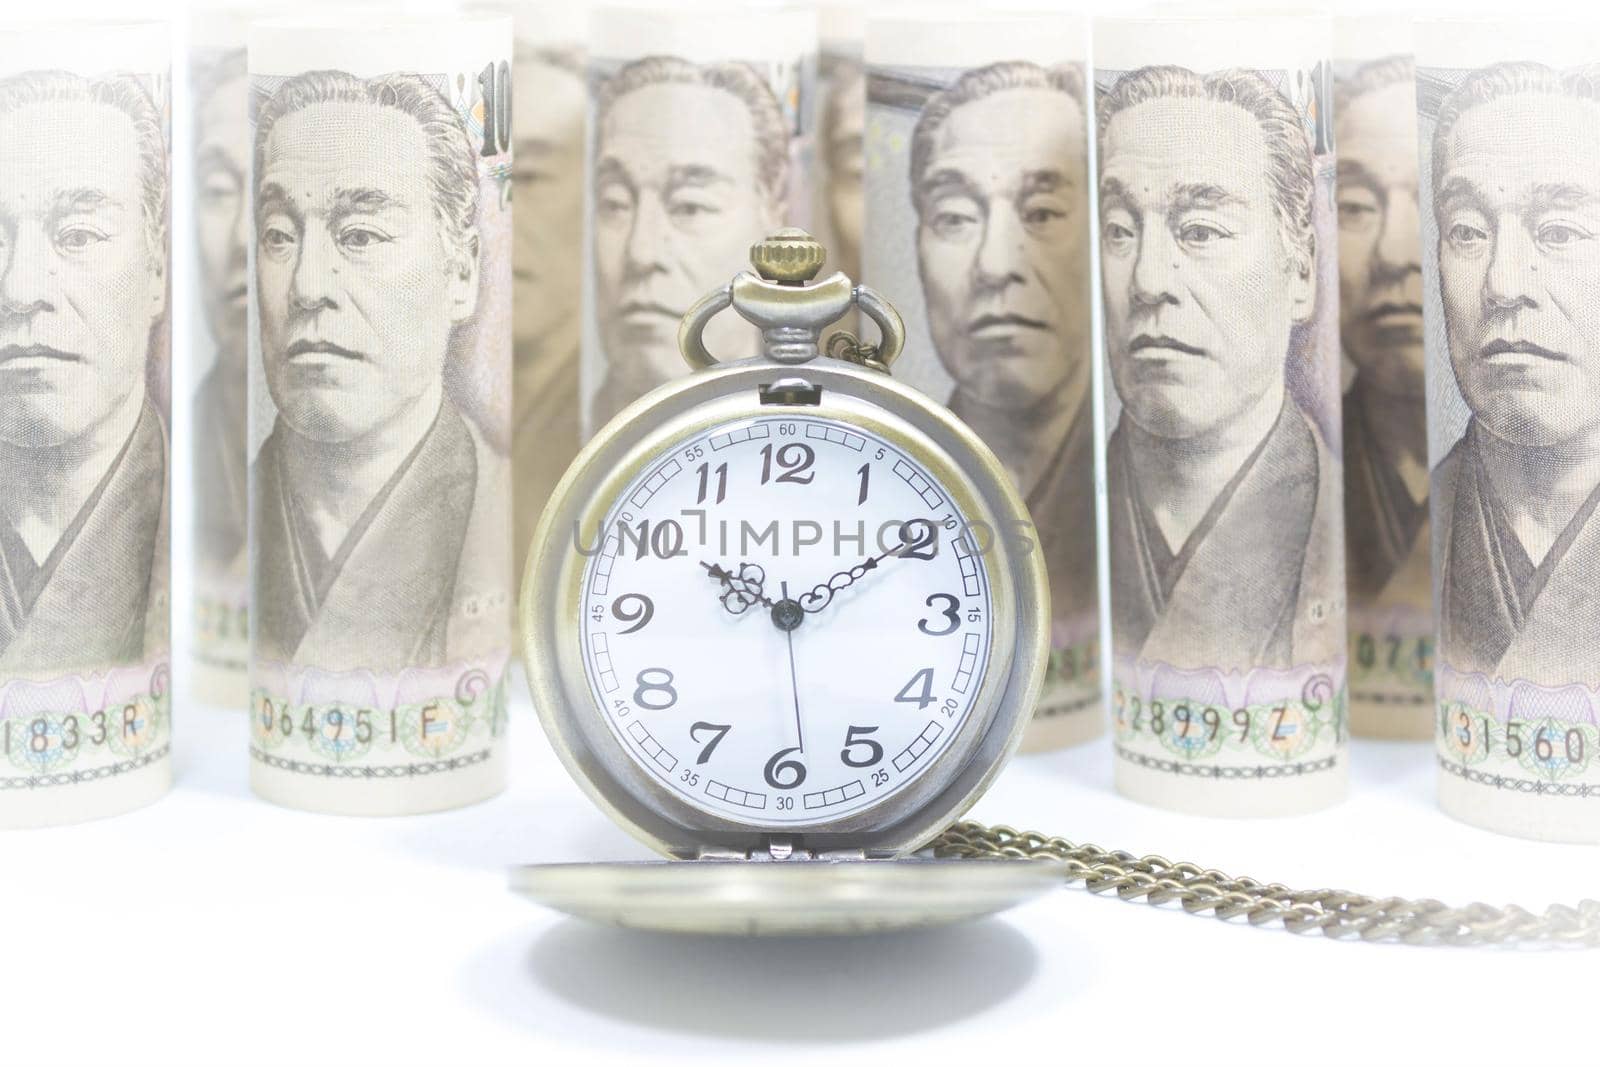 Classic Pocket Watch On Dollar Banknote, Concept And Idea Of Time Value And Money, Business And Finance Concepts.